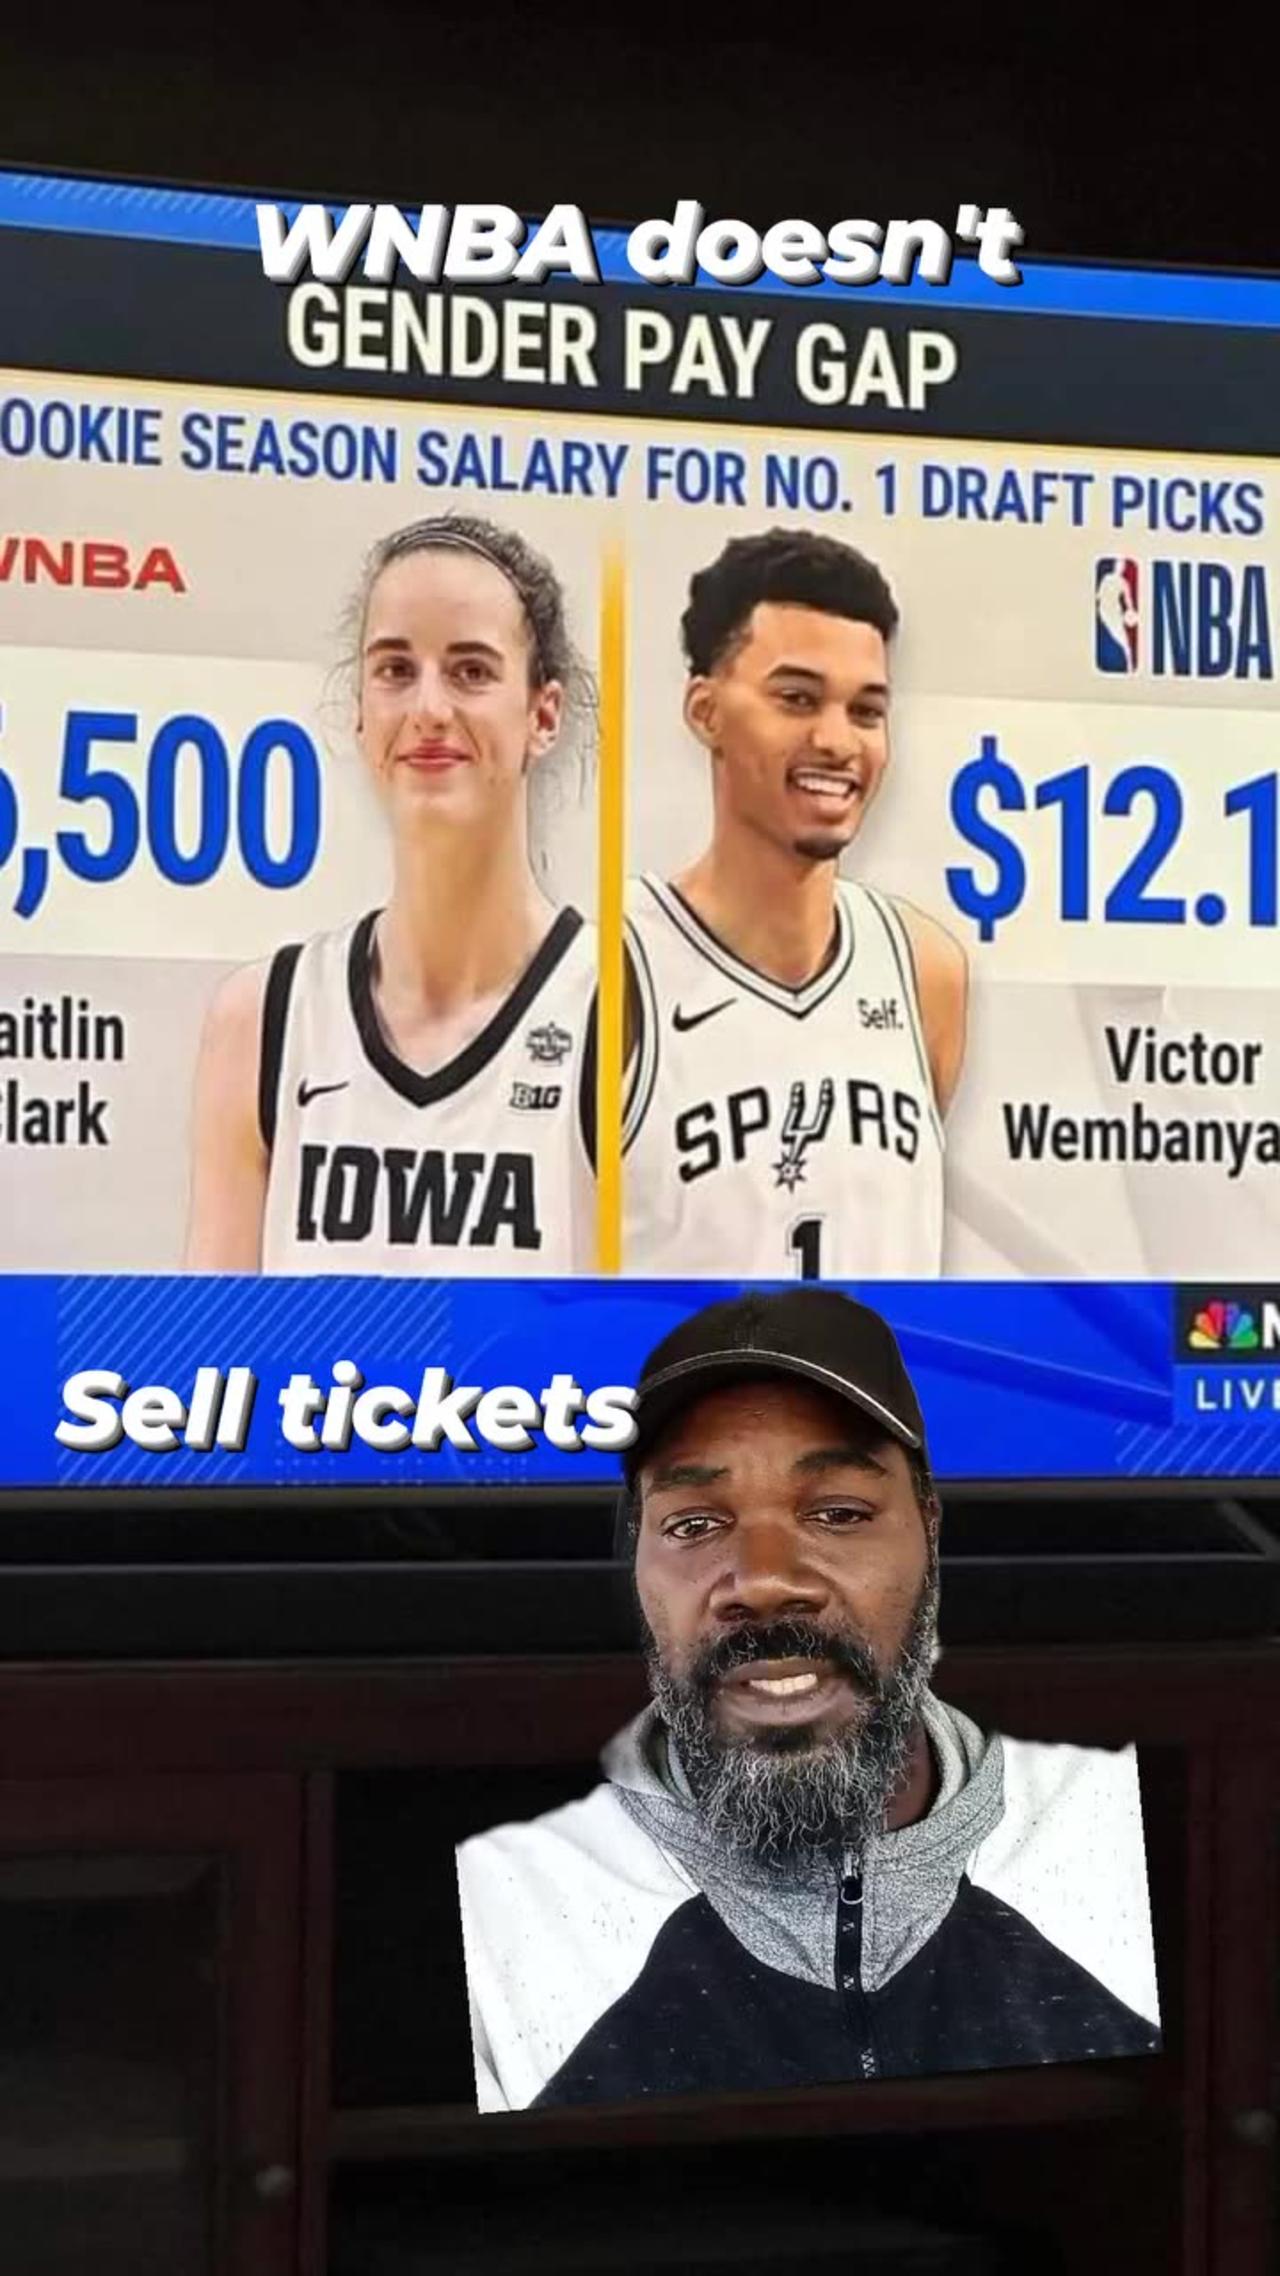 Imagine actually selling some tickets WNBA